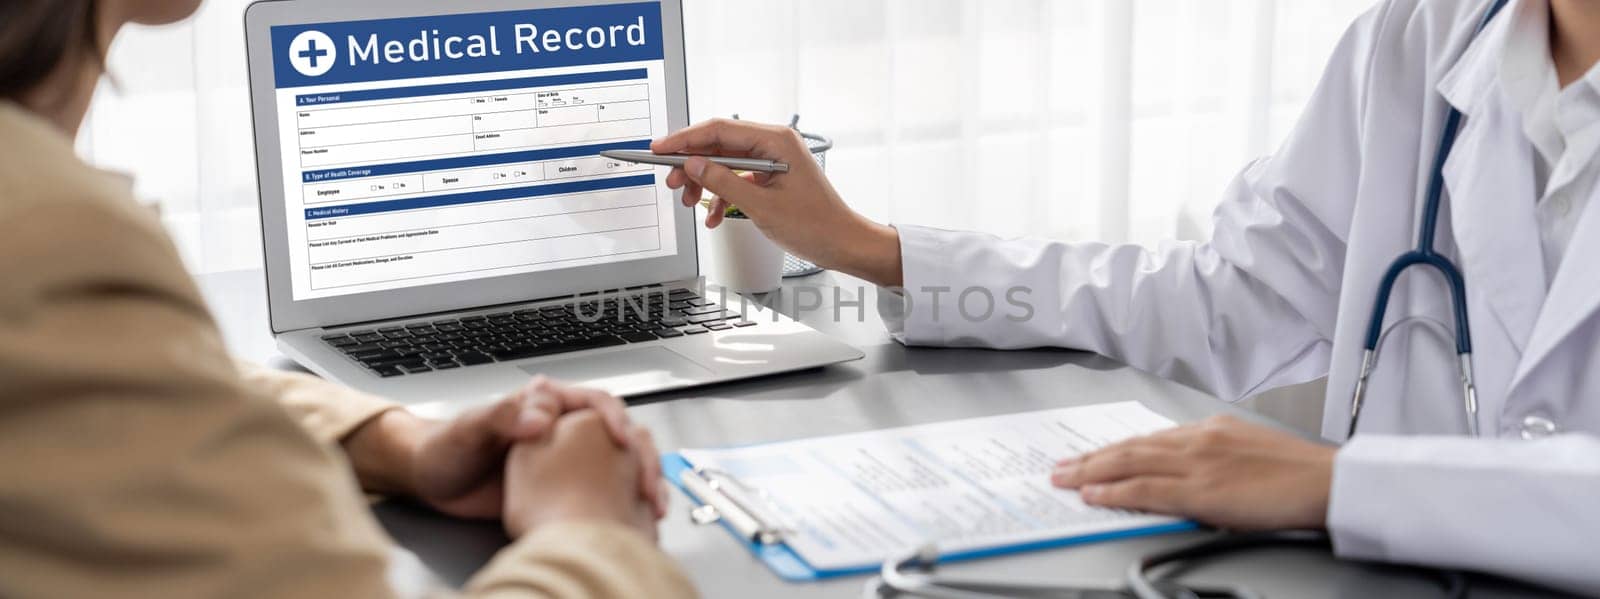 Doctor show medical diagnosis report on laptop to young patient. Neoteric by biancoblue